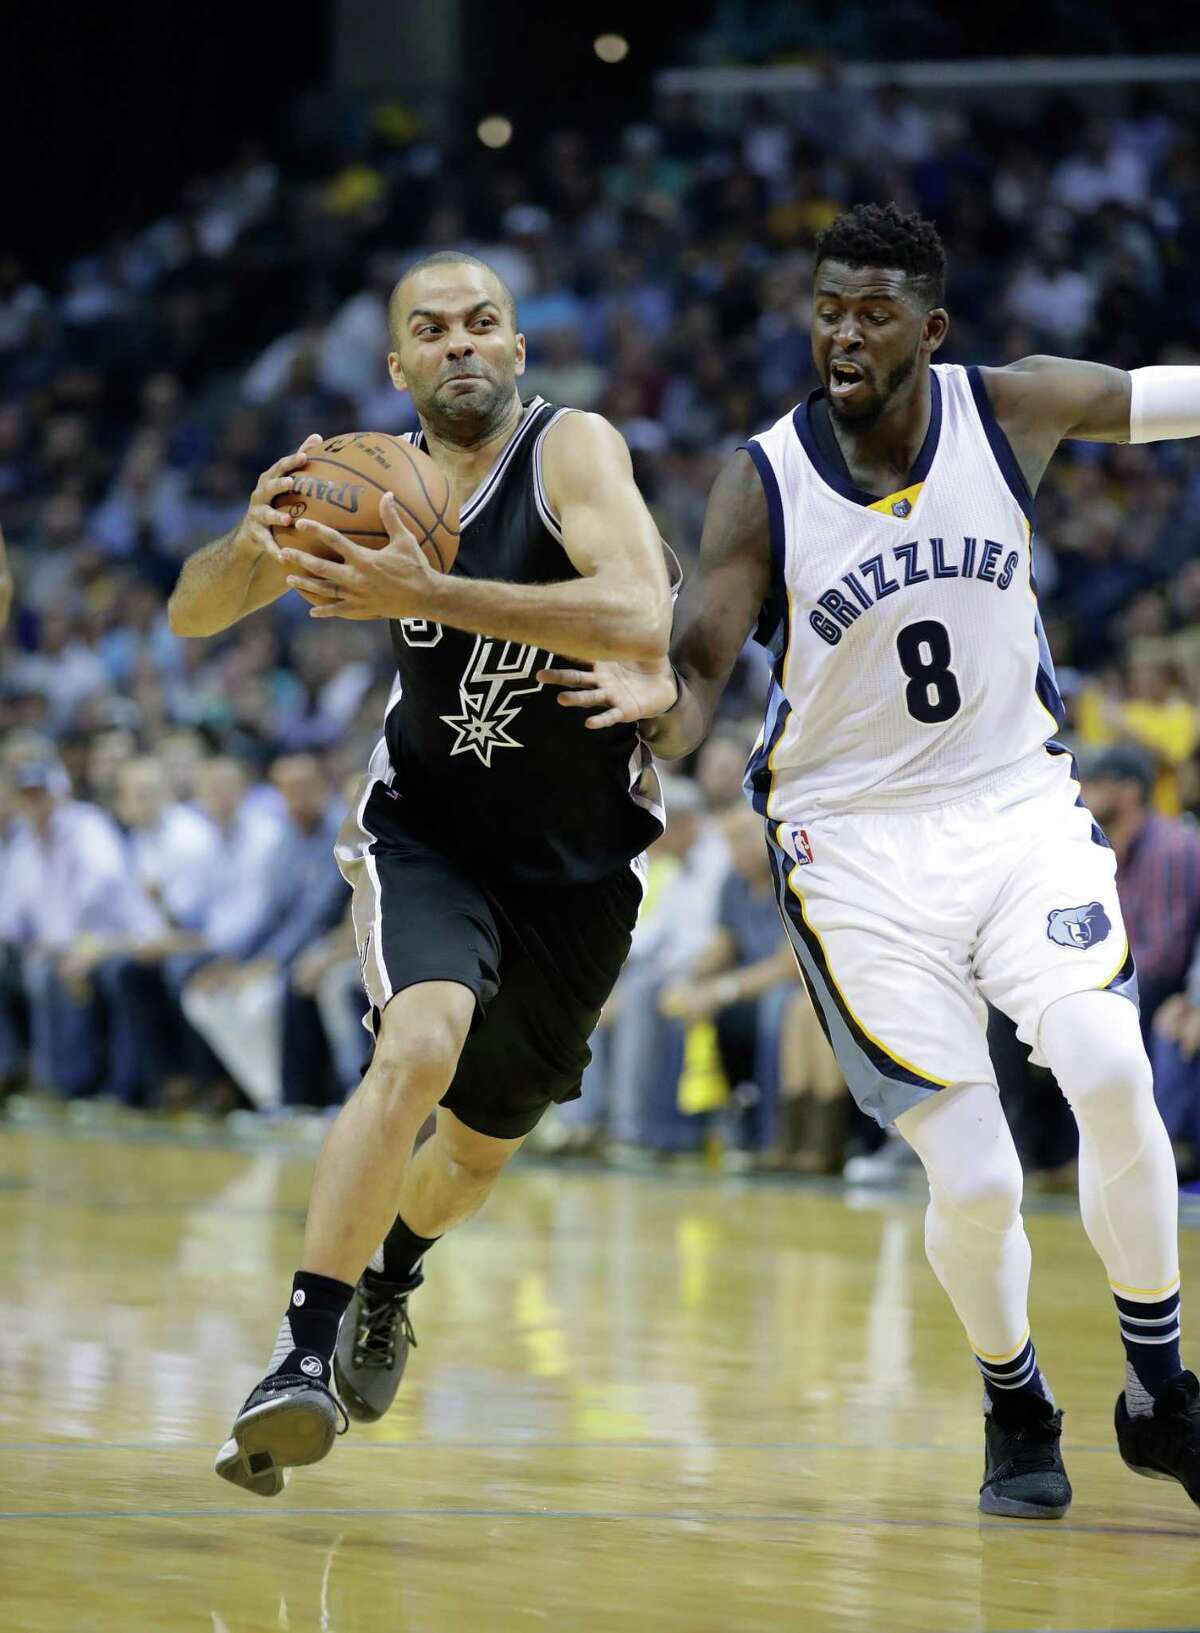 Spurs’ Tony Parker drives past the Grizzlies’ James Ennis during Game 3 at the FedEx Forum on April 20, 2017 in Memphis, Tenn.